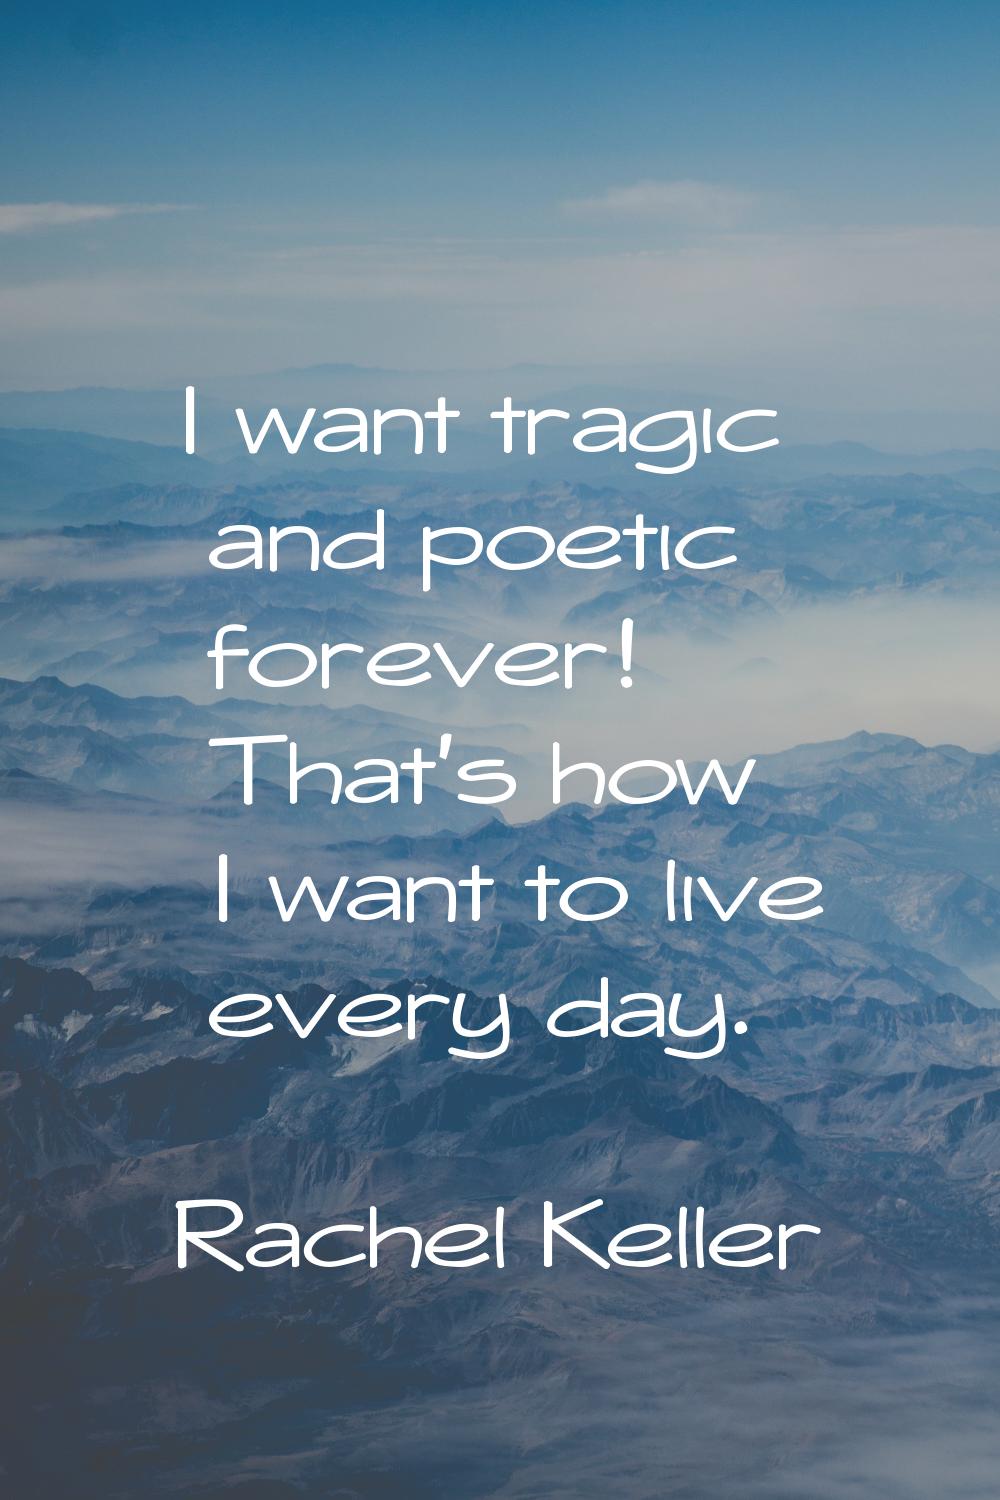 I want tragic and poetic forever! That's how I want to live every day.